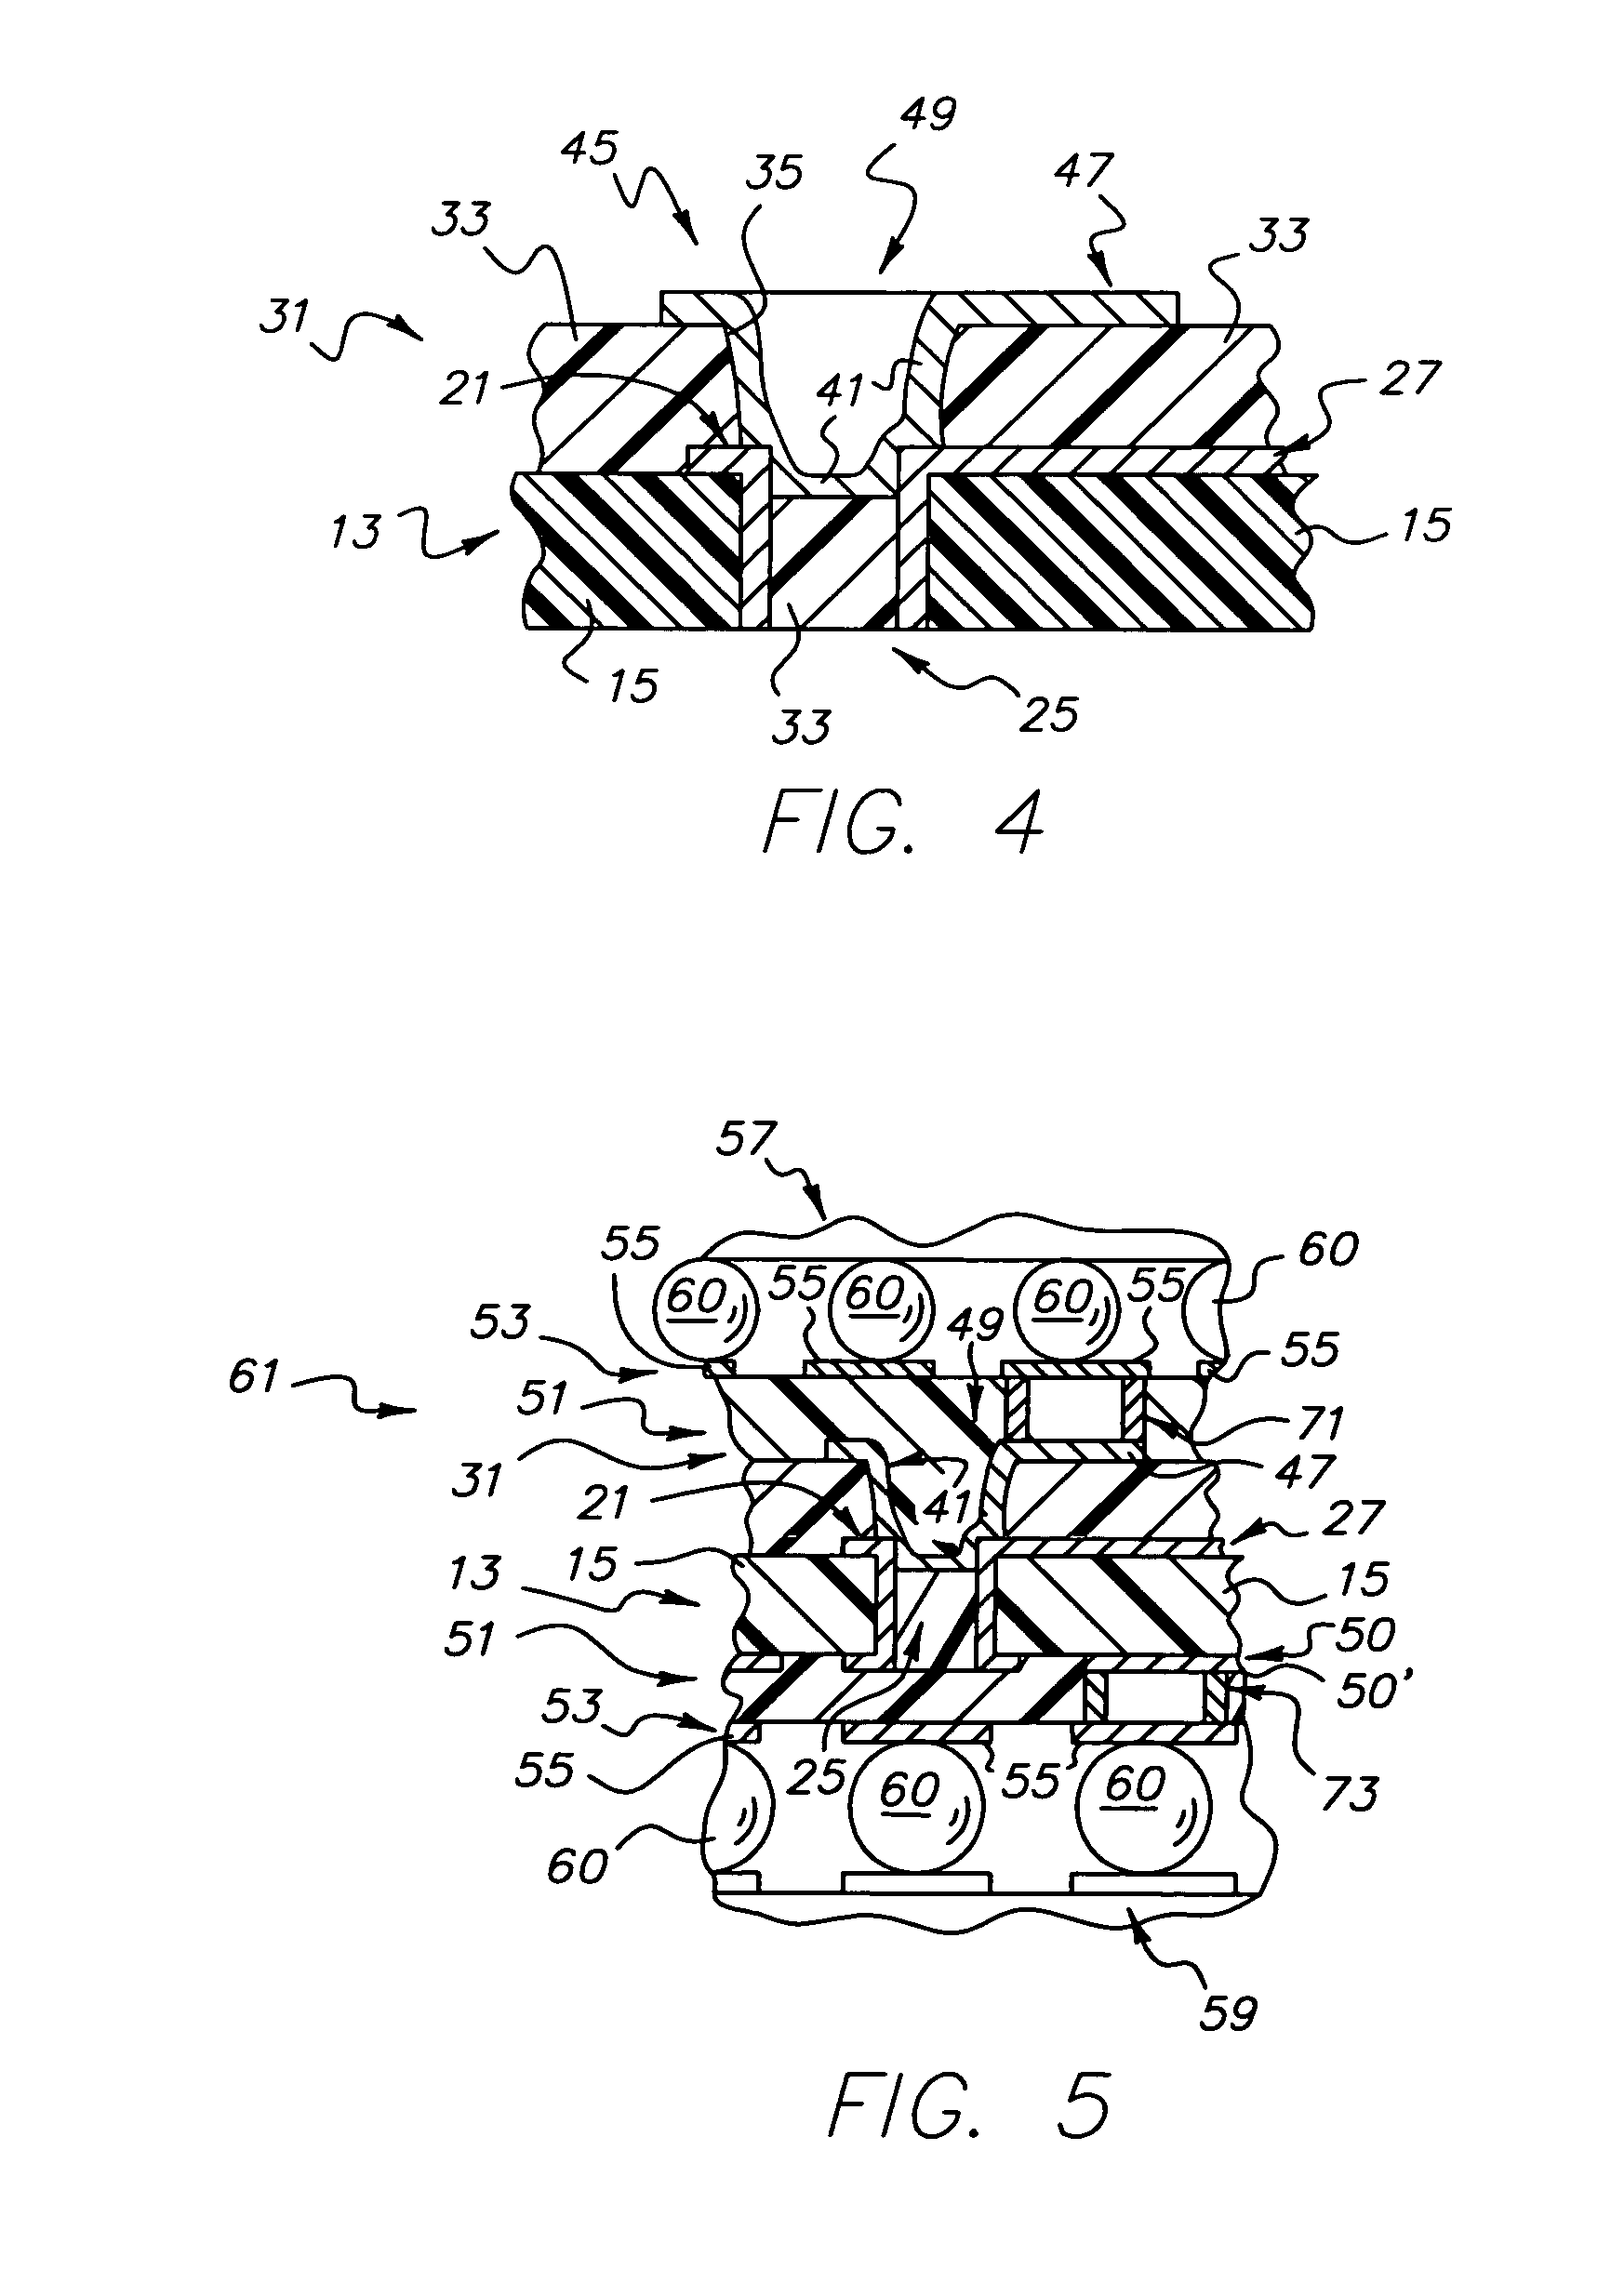 Method of making a circuitized substrate with enhanced circuitry and electrical assembly utilizing said substrate